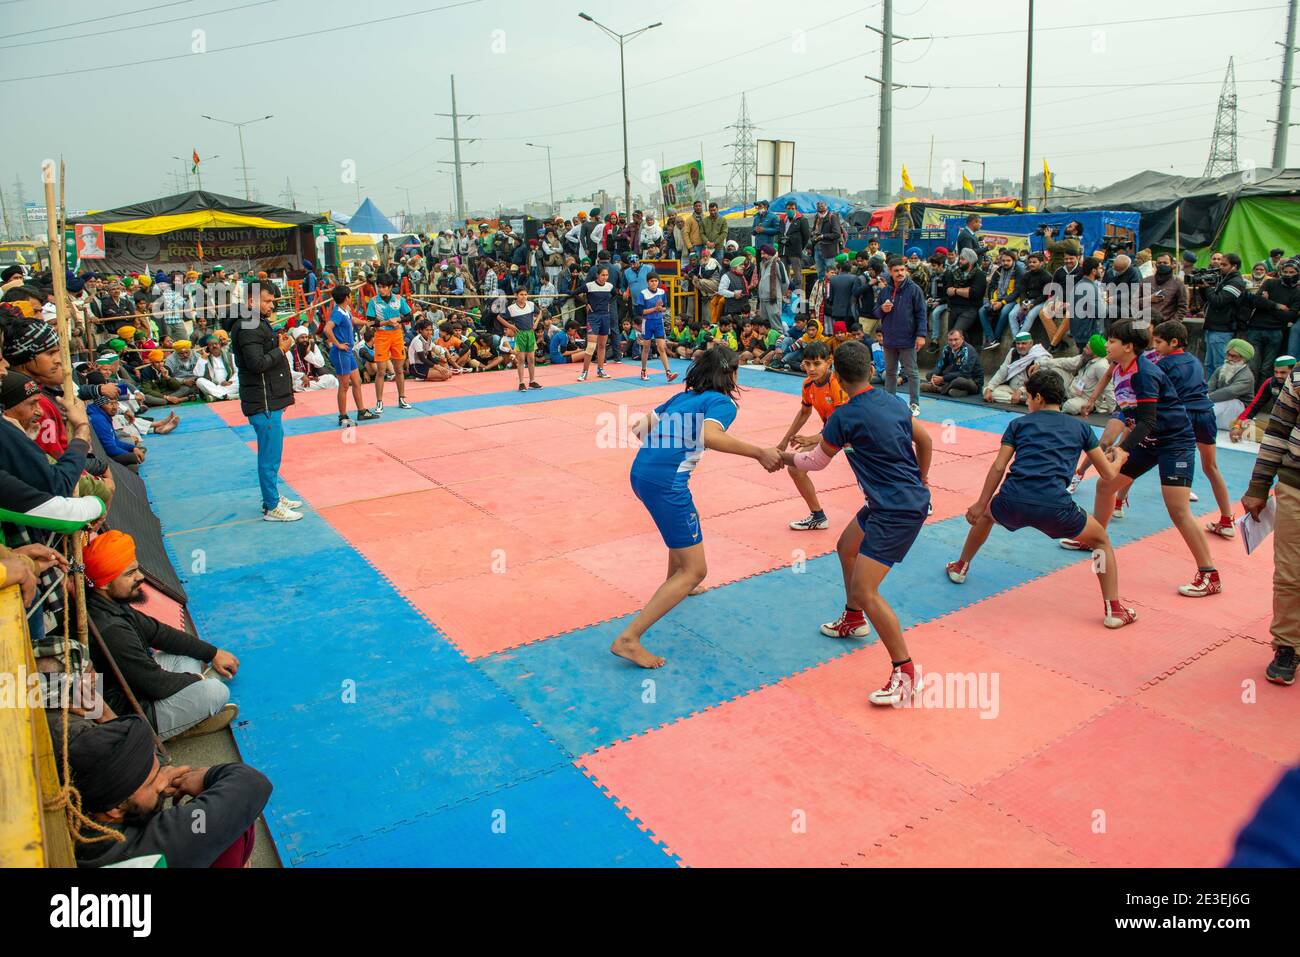 Women's kabaddi match organised in solidarity with the farmers.Dilli Chalo' farmers' agitation has entered its 54th day. The tenth round of talks between the Centre and the leaders of farmers' unions is expected to be held tomorrow. Stock Photo